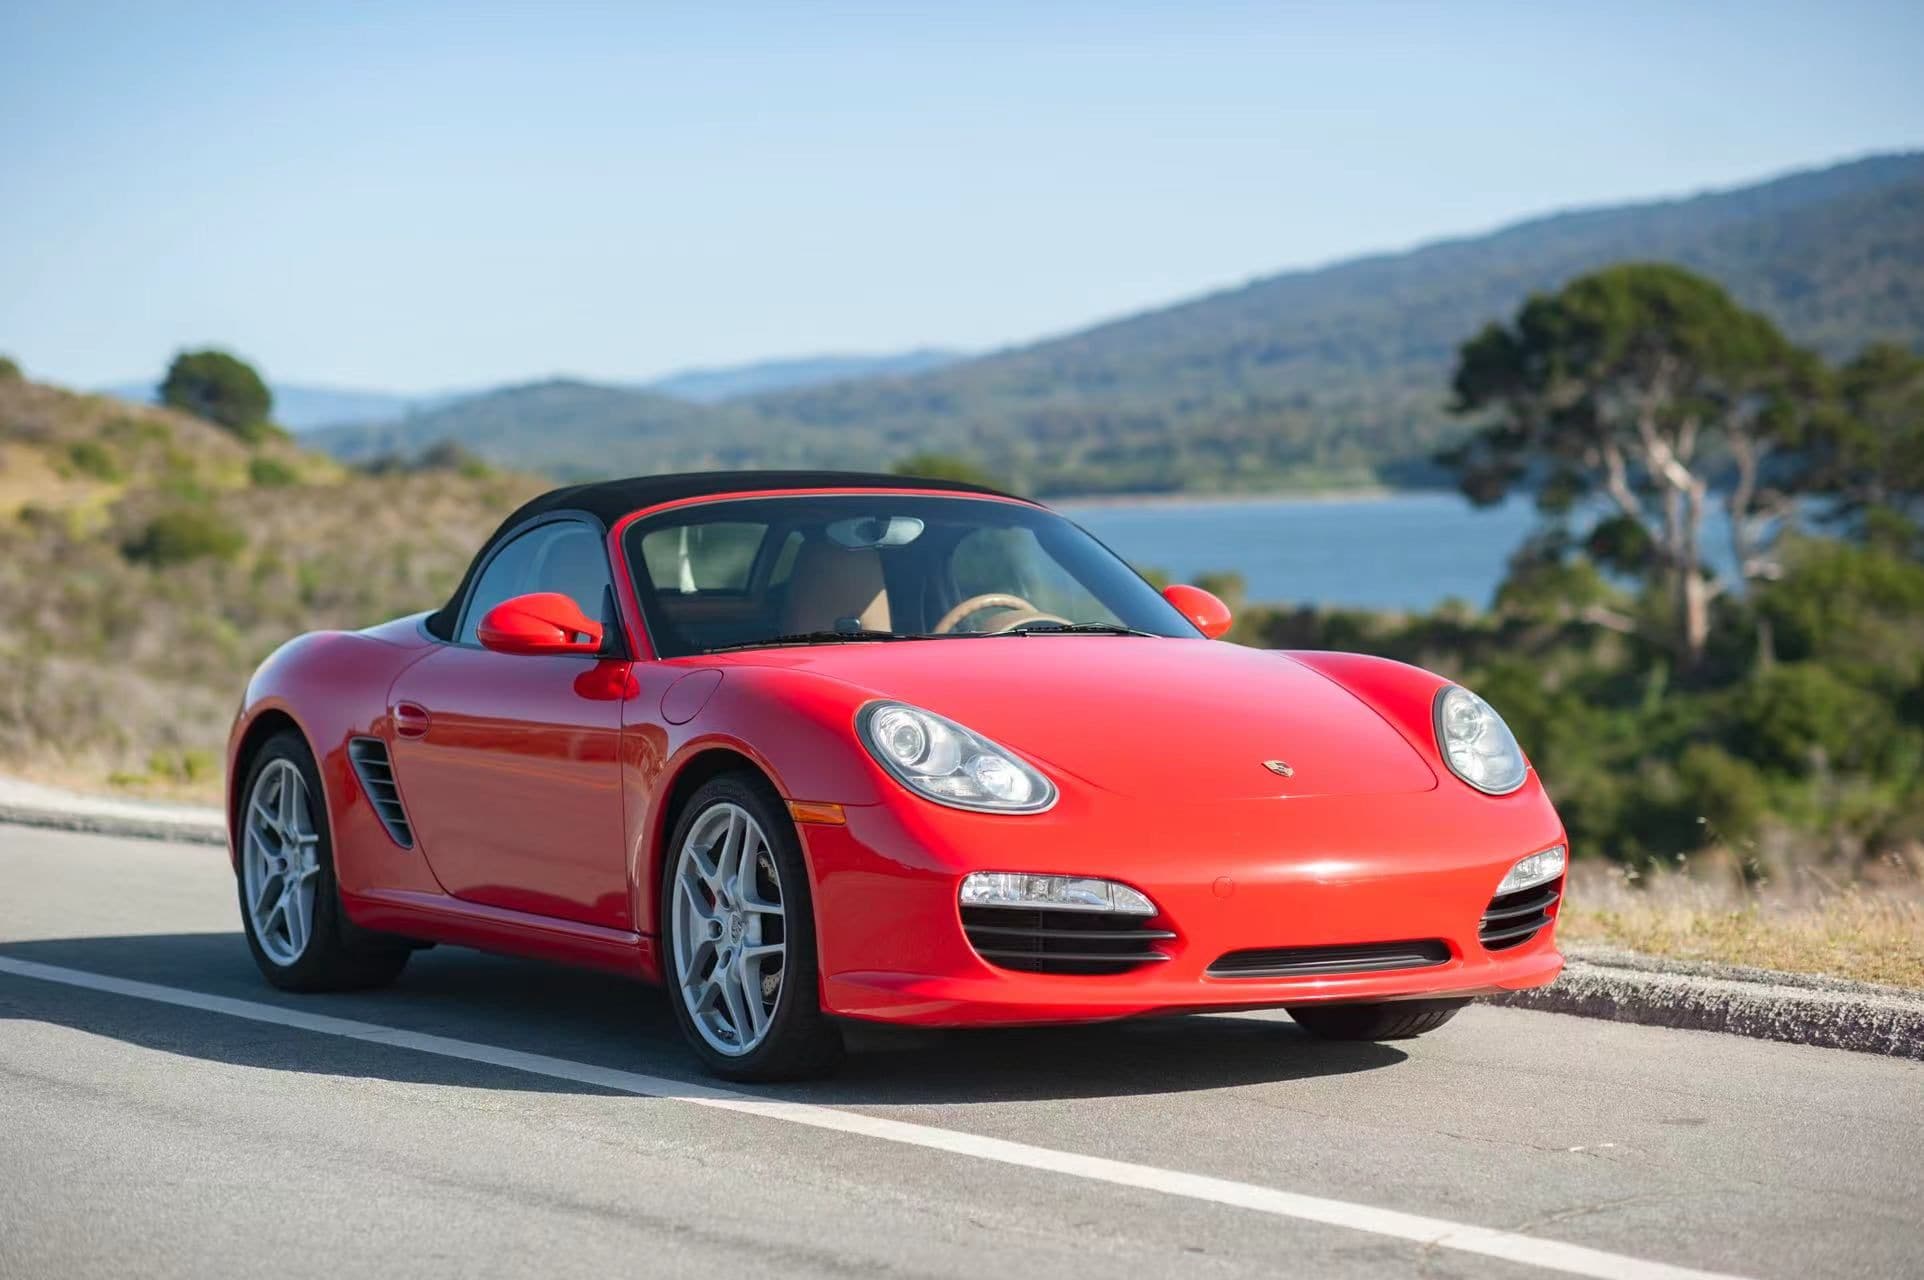 2009 Porsche Boxster - 2009 Boxster S 987.2 - Used - VIN WP0CB29809U730427 - 121,000 Miles - 6 cyl - 2WD - Manual - Convertible - Red - San Mateo, CA 94403, United States